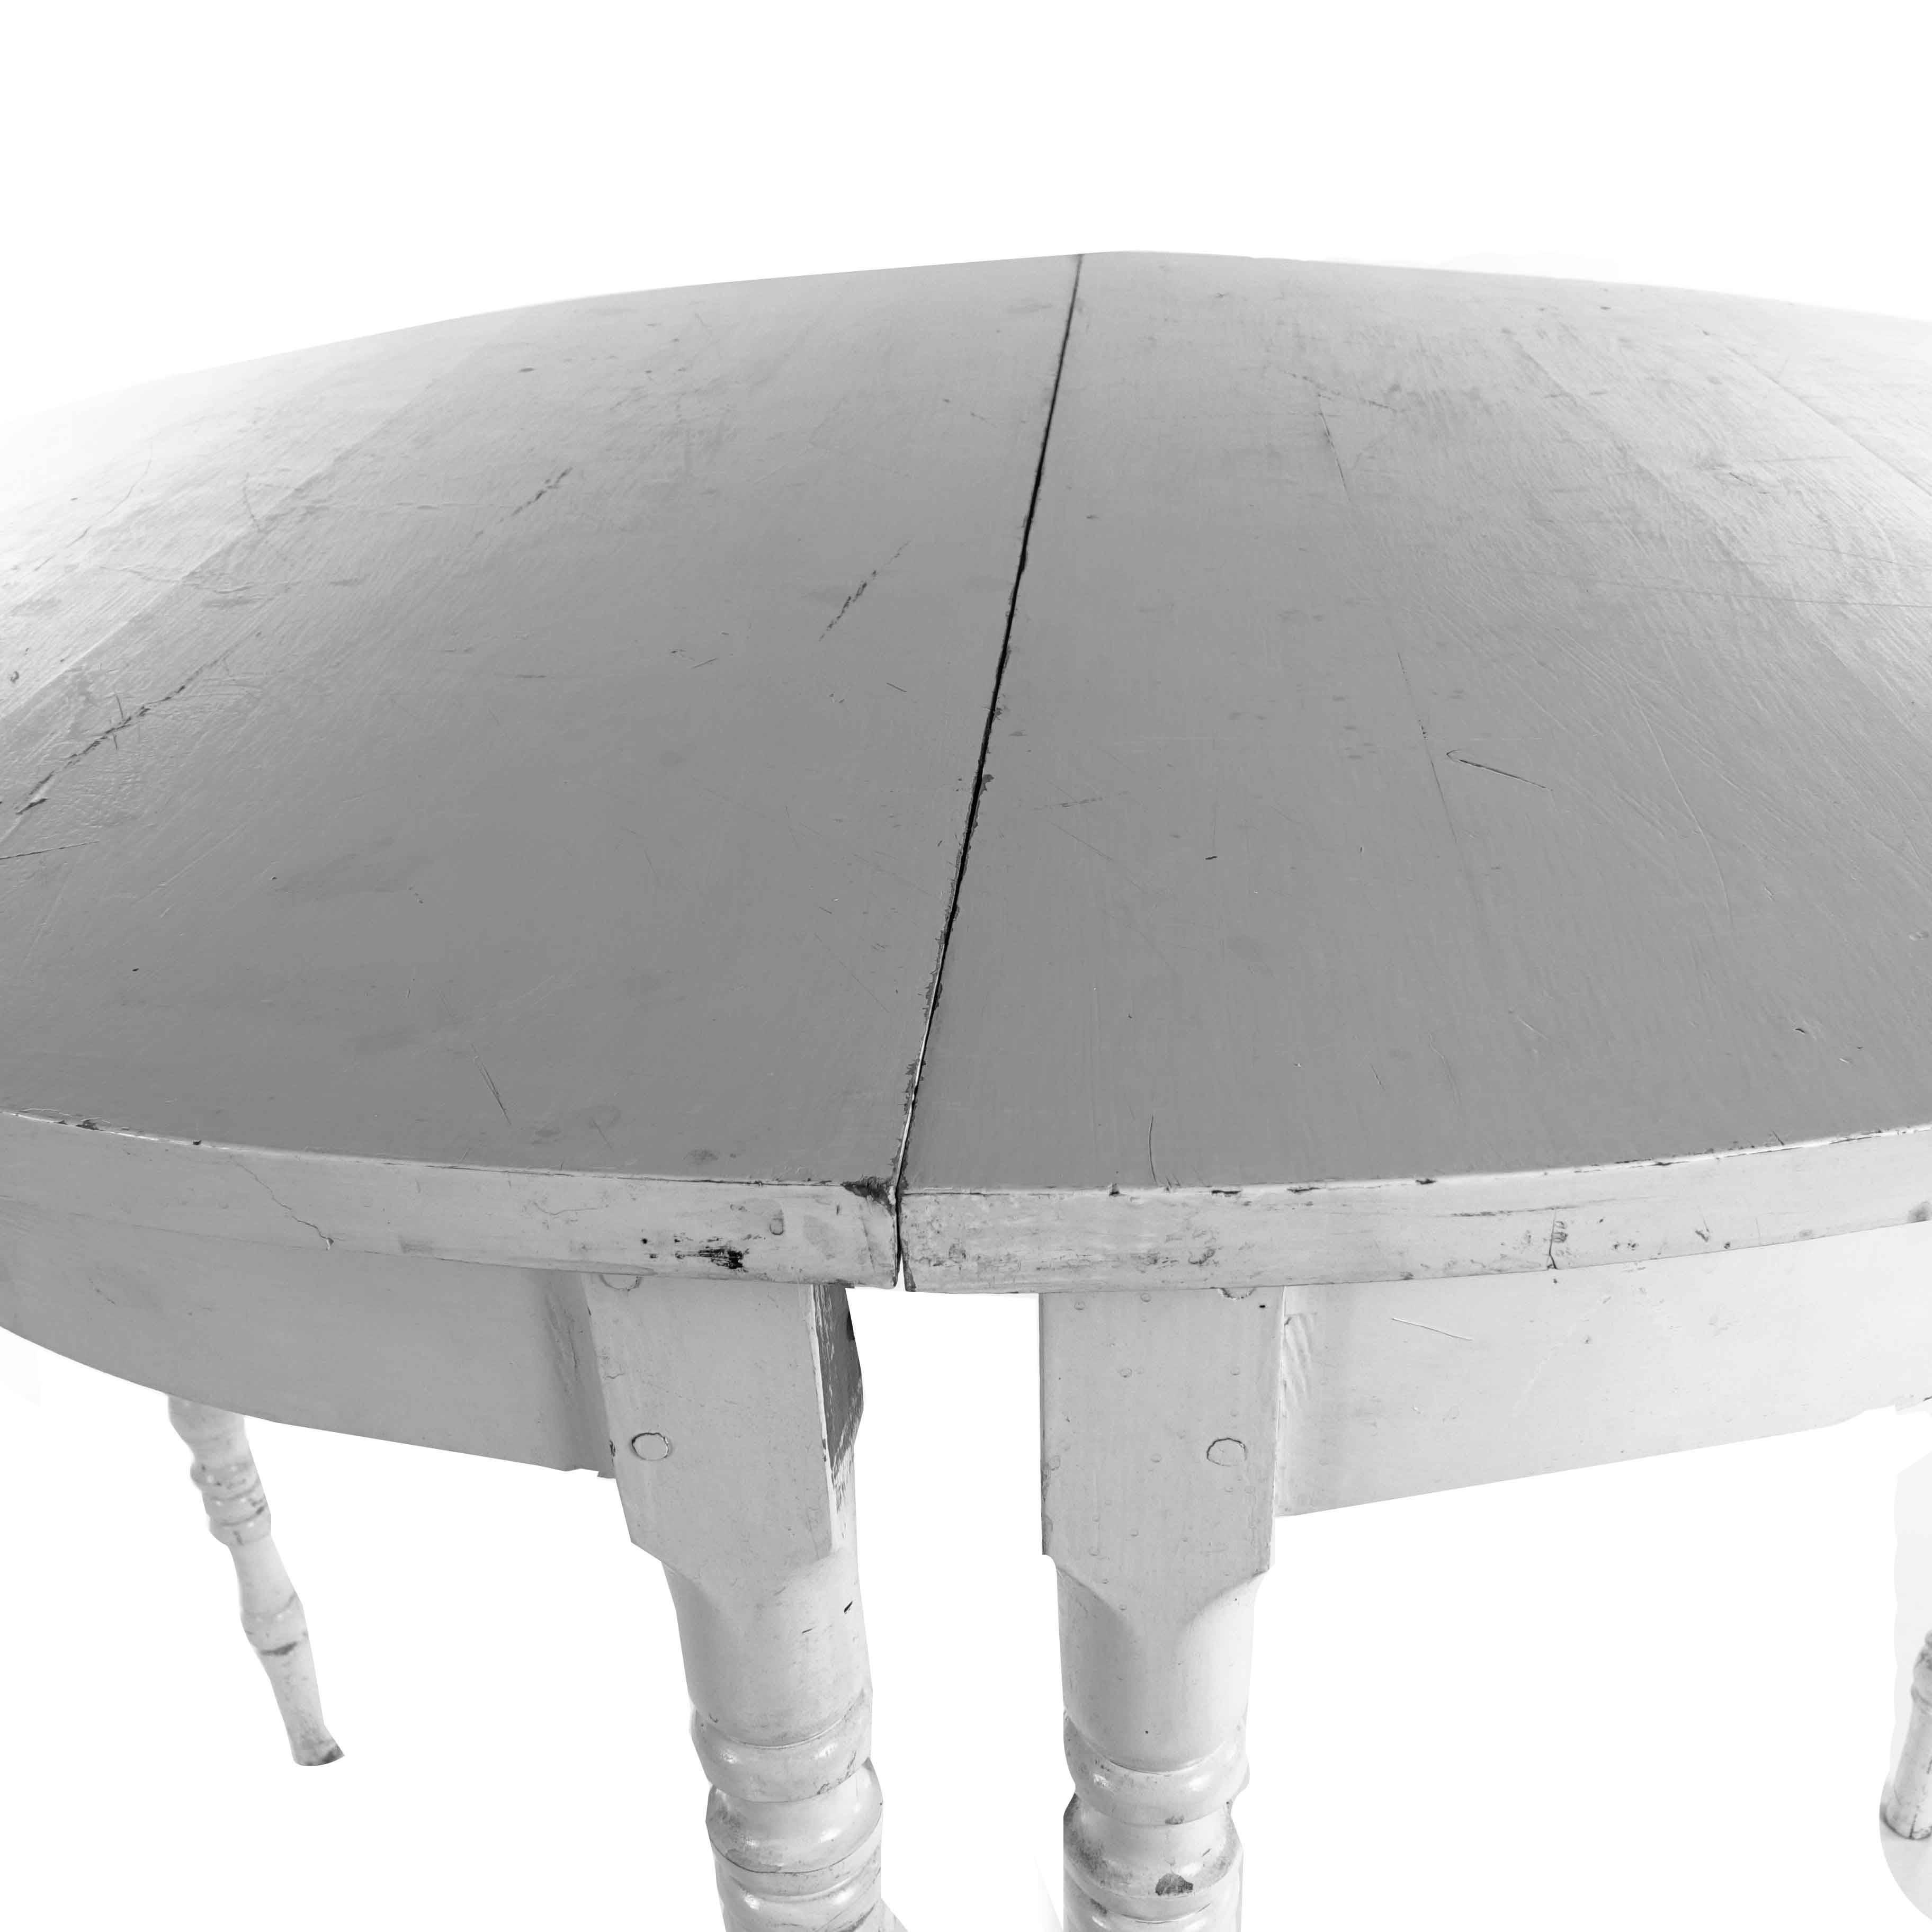 Fantastic unique looking moon tables with beautiful lines. White painted pine in good condition